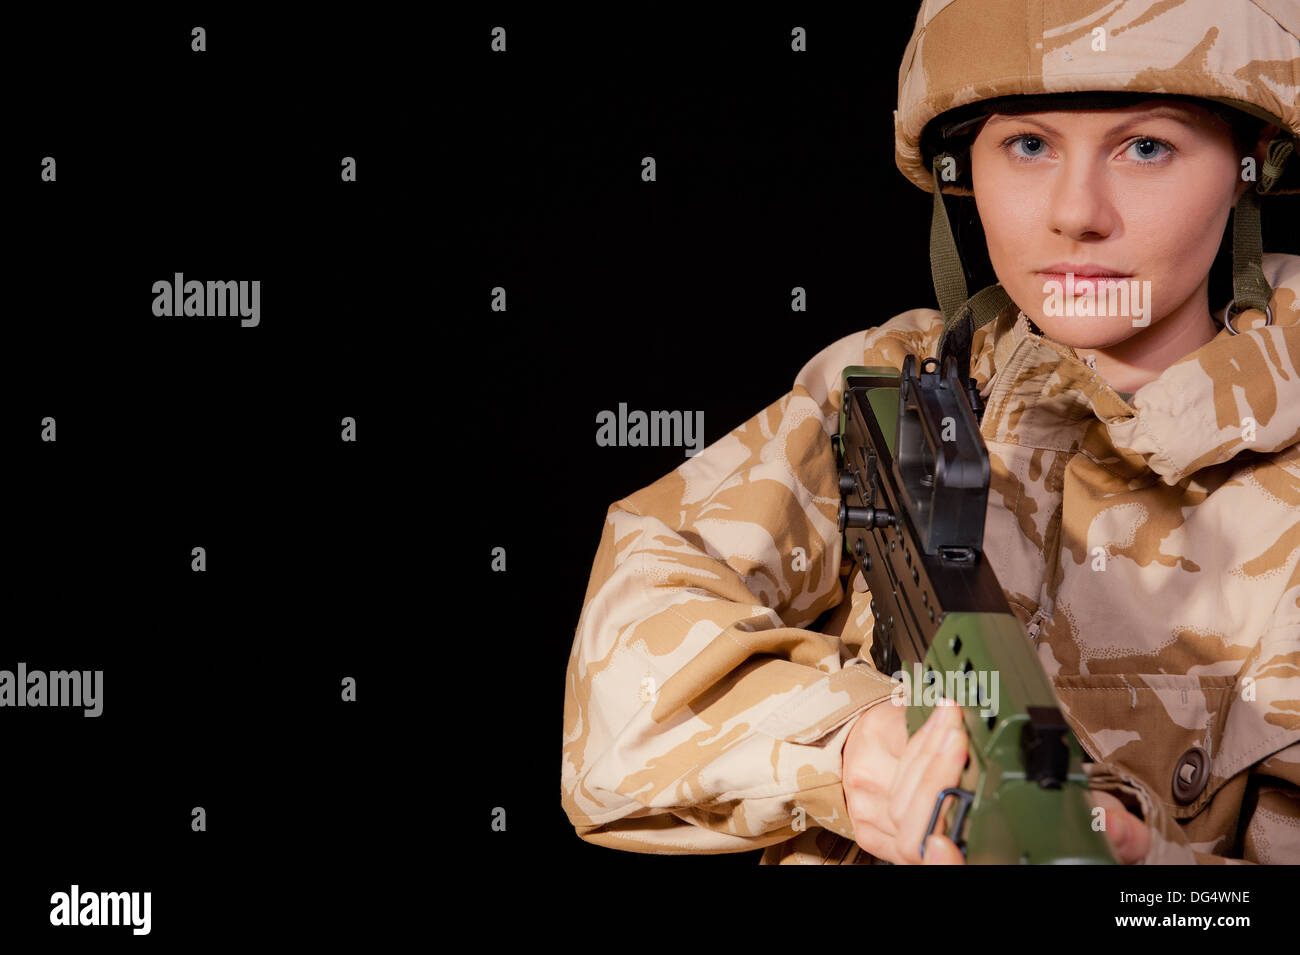 Female soldier holding an SA80 rifle, against a black background. She is wearing British Military desert camouflage uniform. Stock Photo